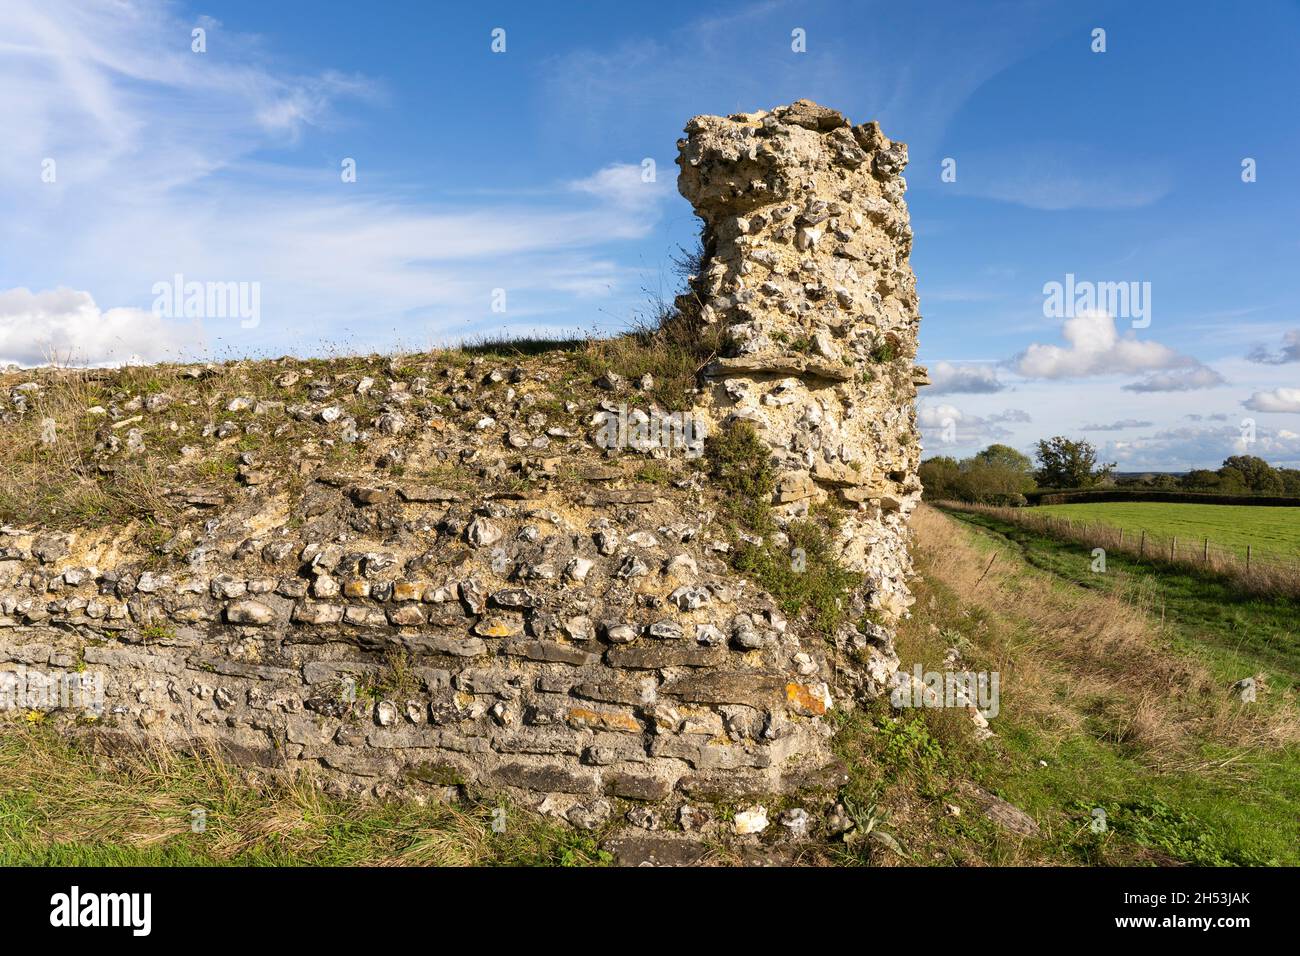 The South Gate of the ruined Roman town wall showing the flint and stone core held together by lime mortar at Silchester. Hampshire, UK Stock Photo